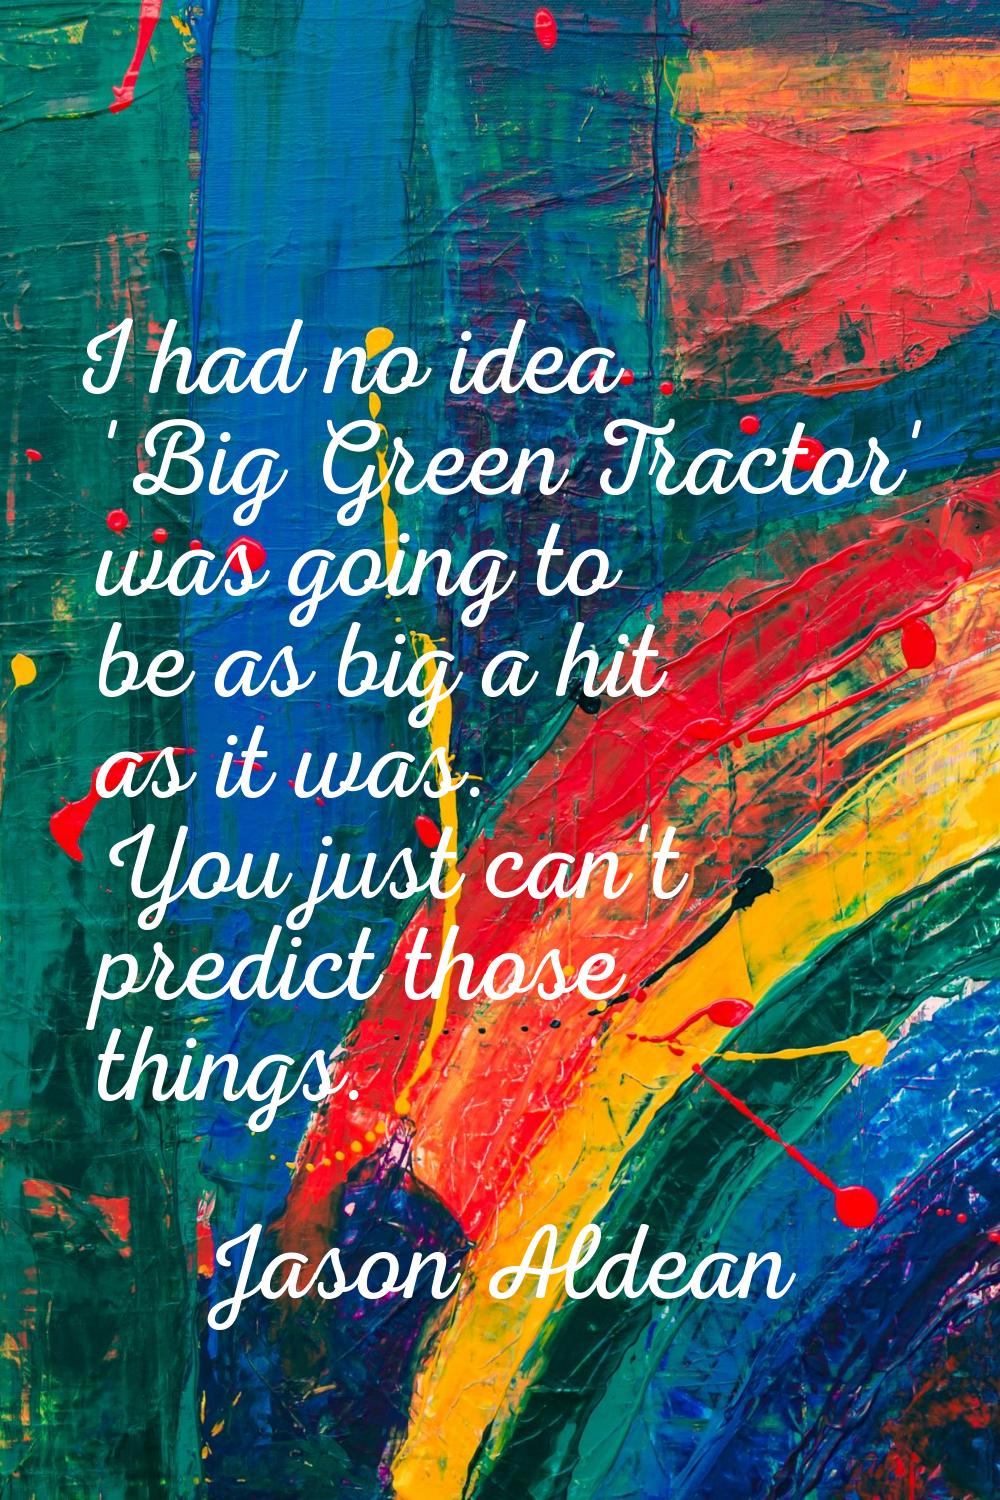 I had no idea 'Big Green Tractor' was going to be as big a hit as it was. You just can't predict th